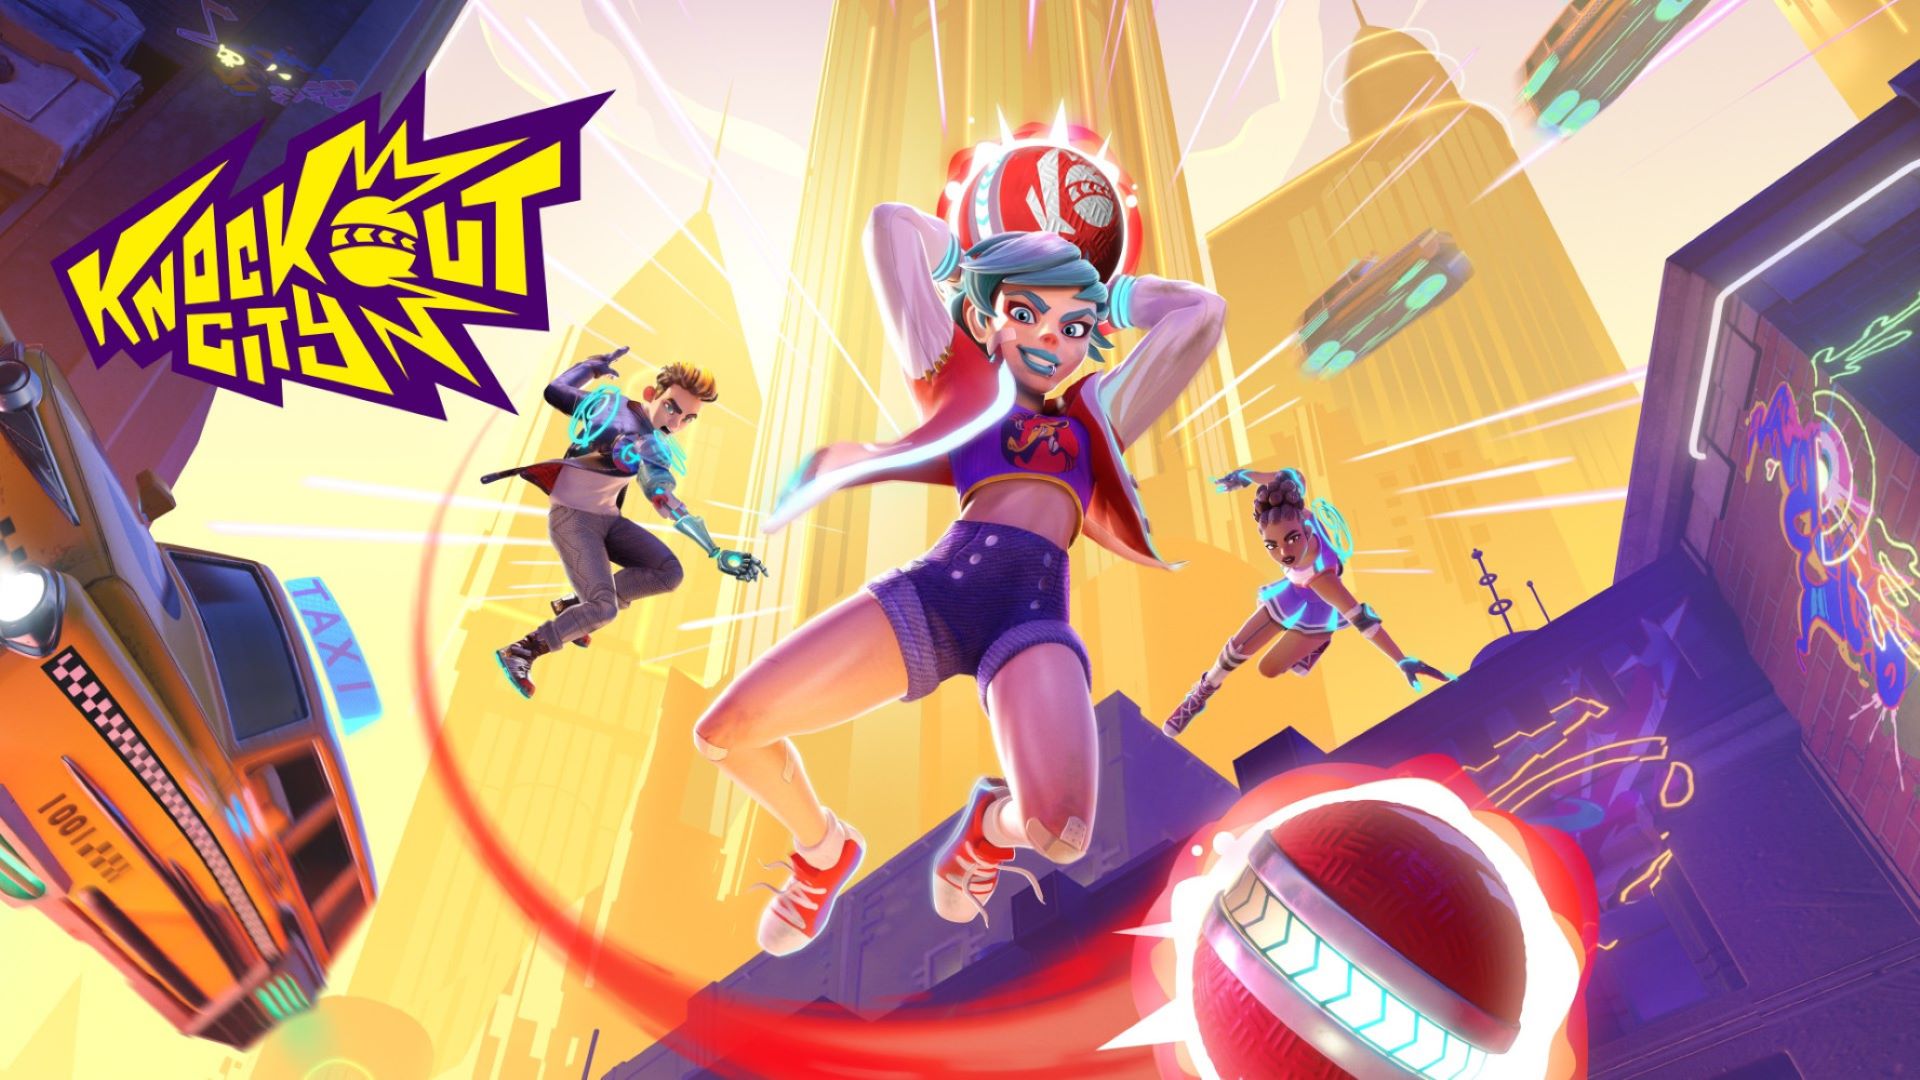 Fun dodgebrawler Knockout City is now officially free-to-play